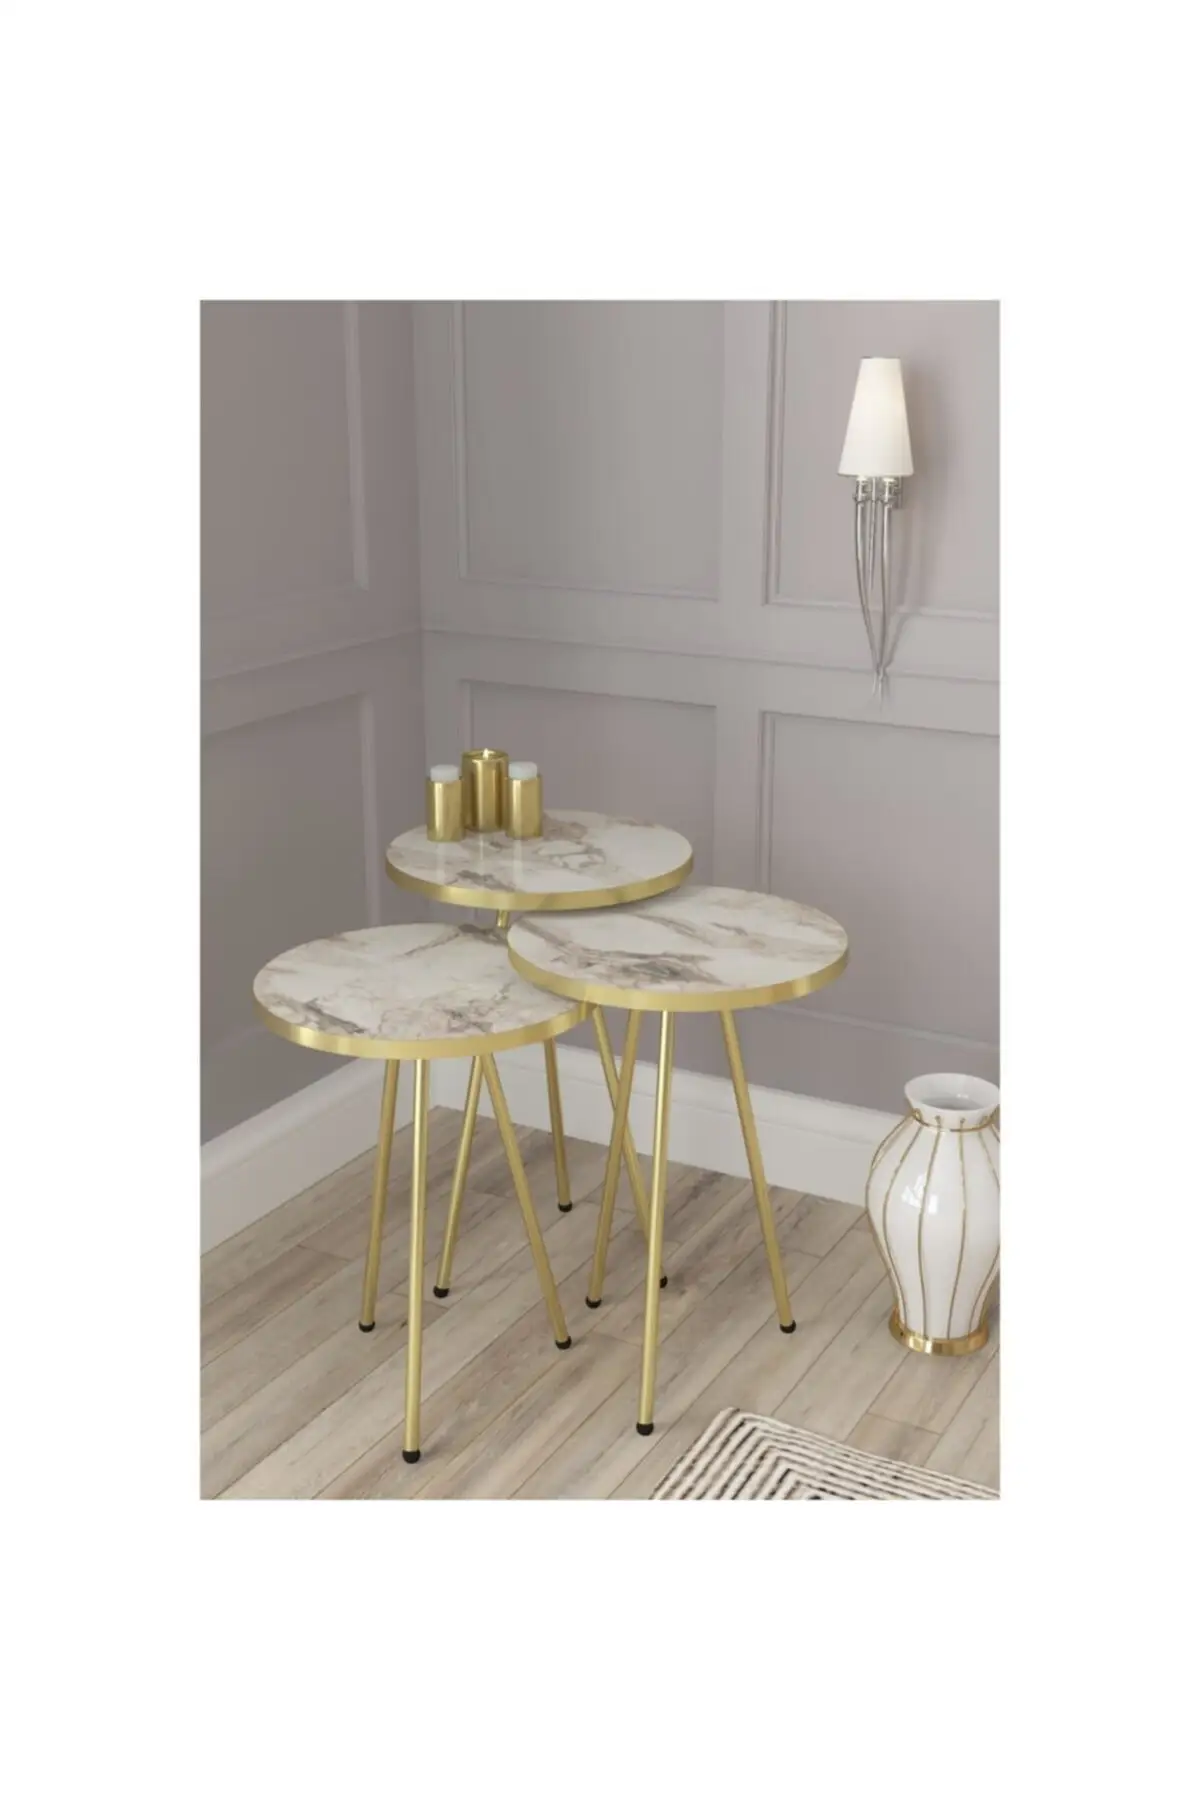 

Modern Zigon Coffee Table 3 Pcs Nordic Gold Metal Toe At Mount Side Coffee Table Tea Coffee Service Table Round Living Room bedside Table